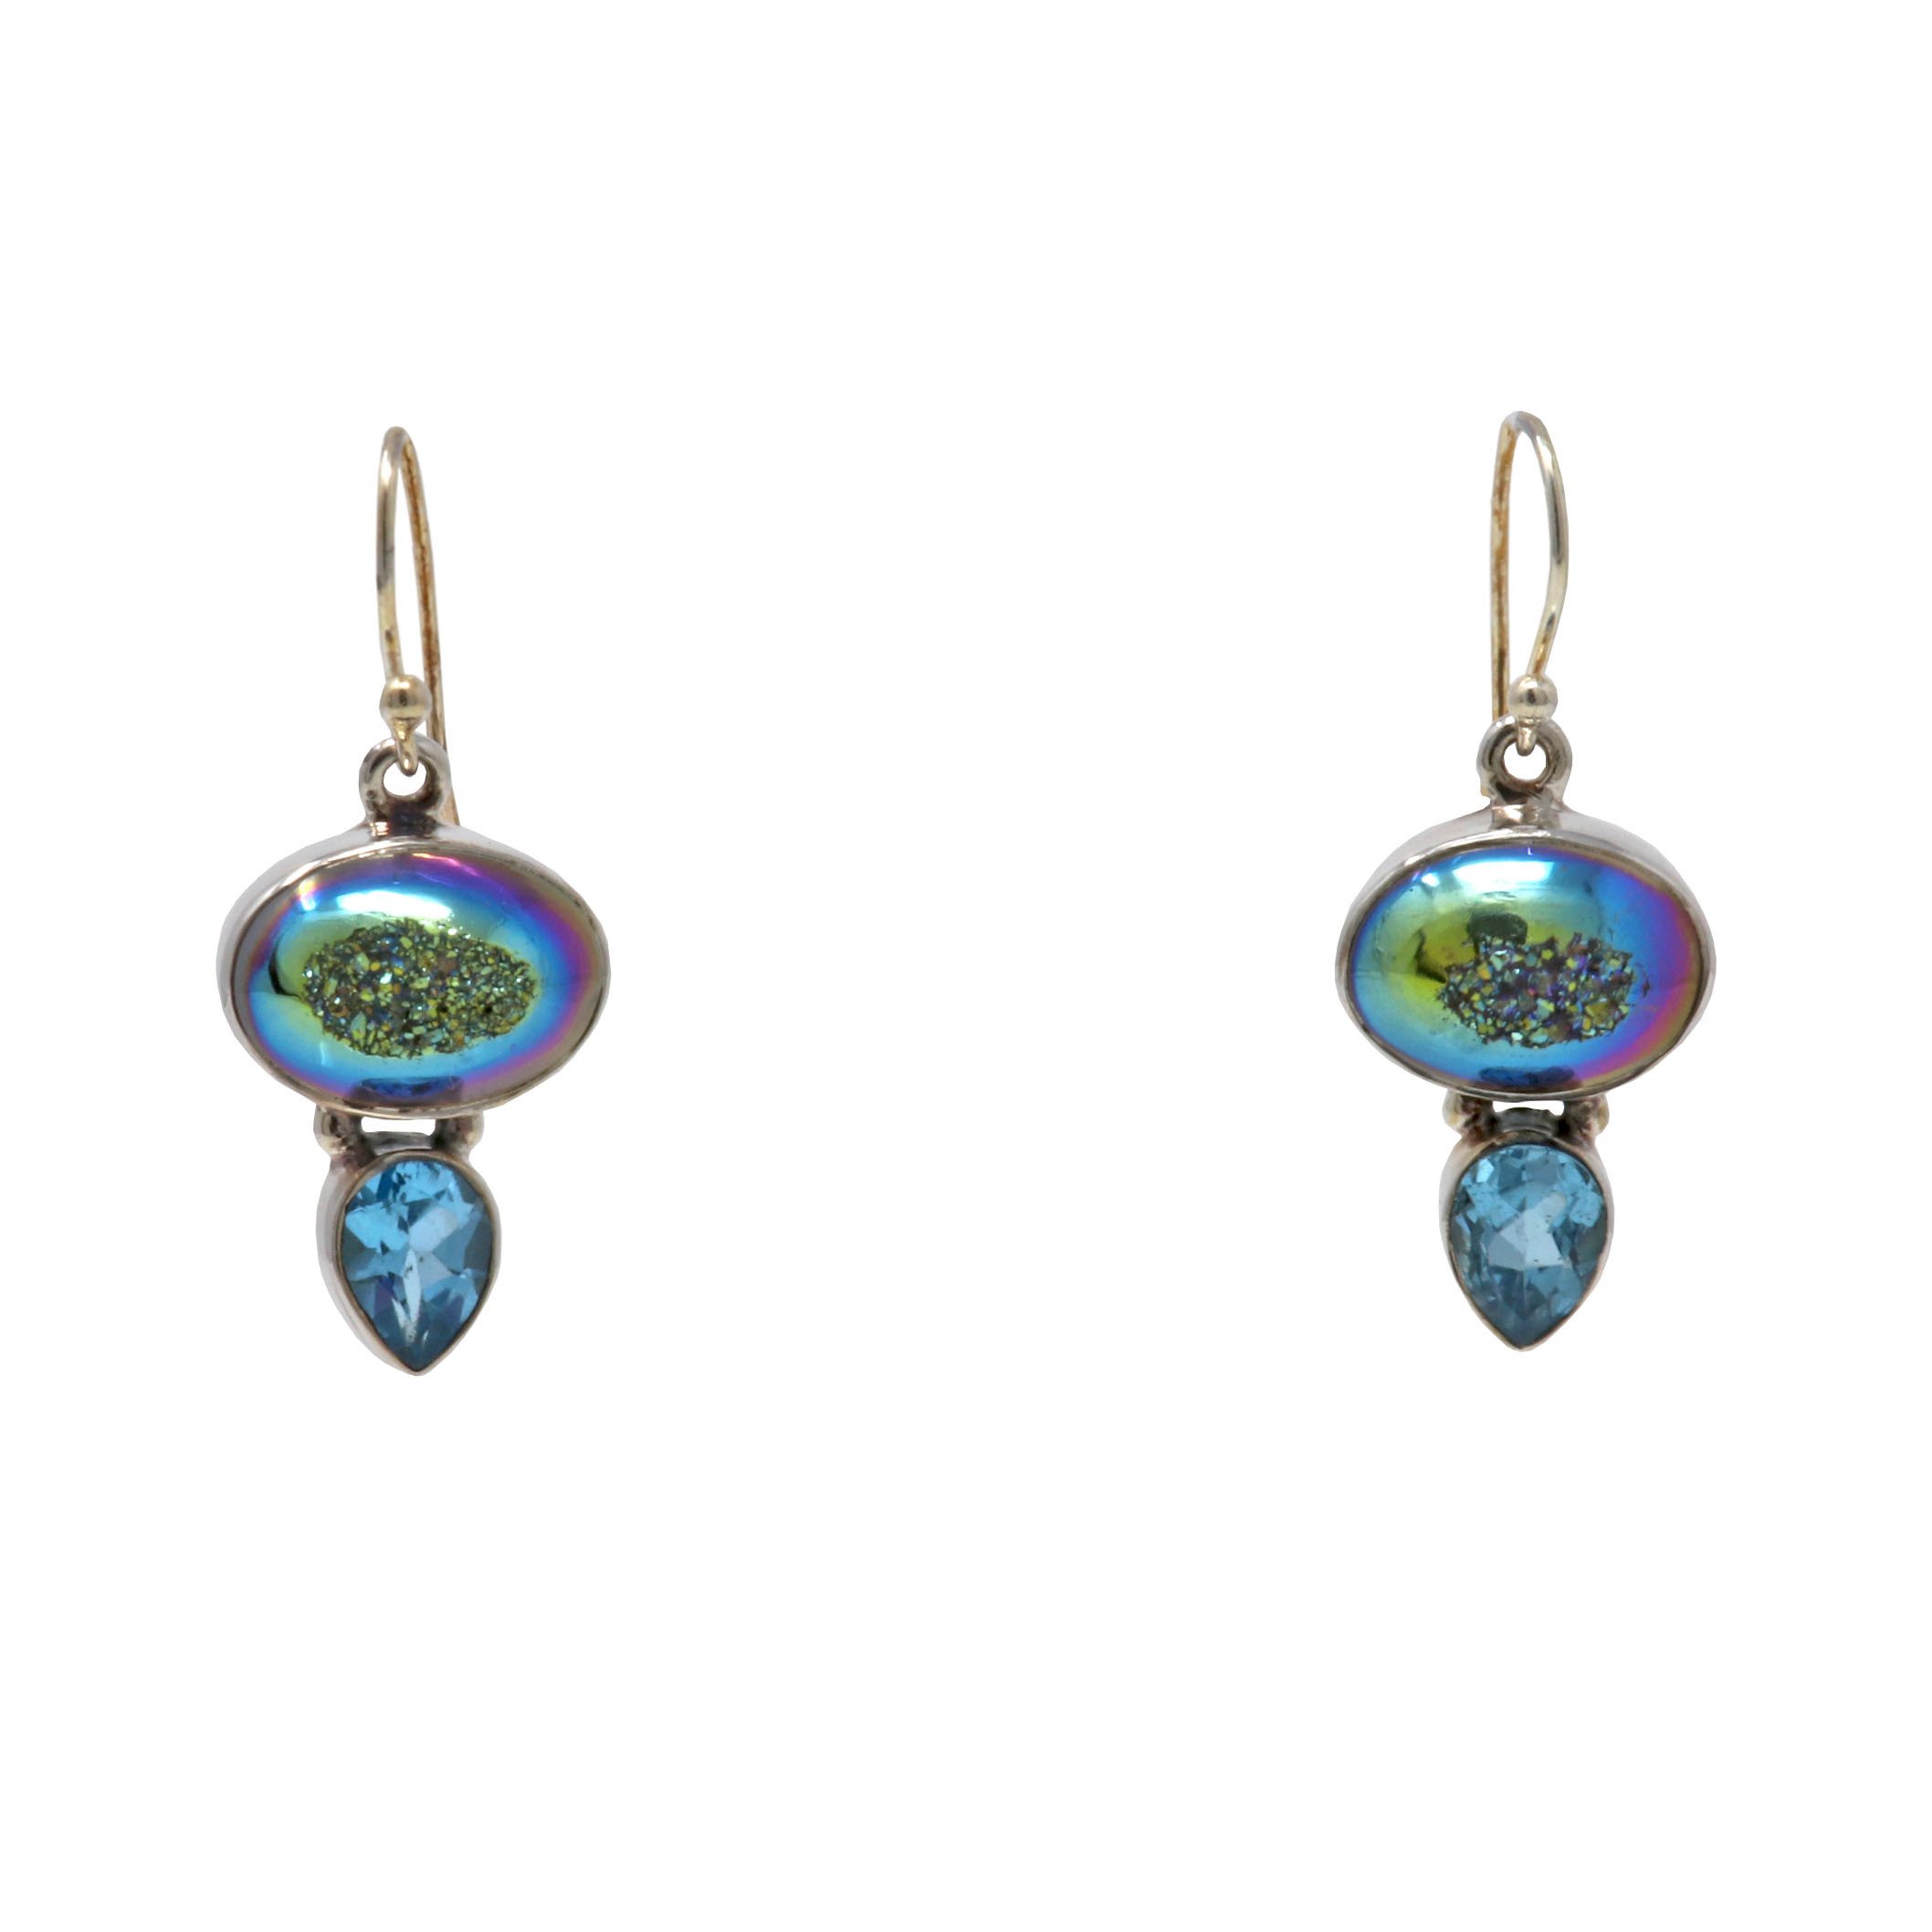 Rainbow Titanium Druze Dangle Earrings - Oval Cabochon With Geode Center & Faceted Blue Topaz Pear With Silver Bezels